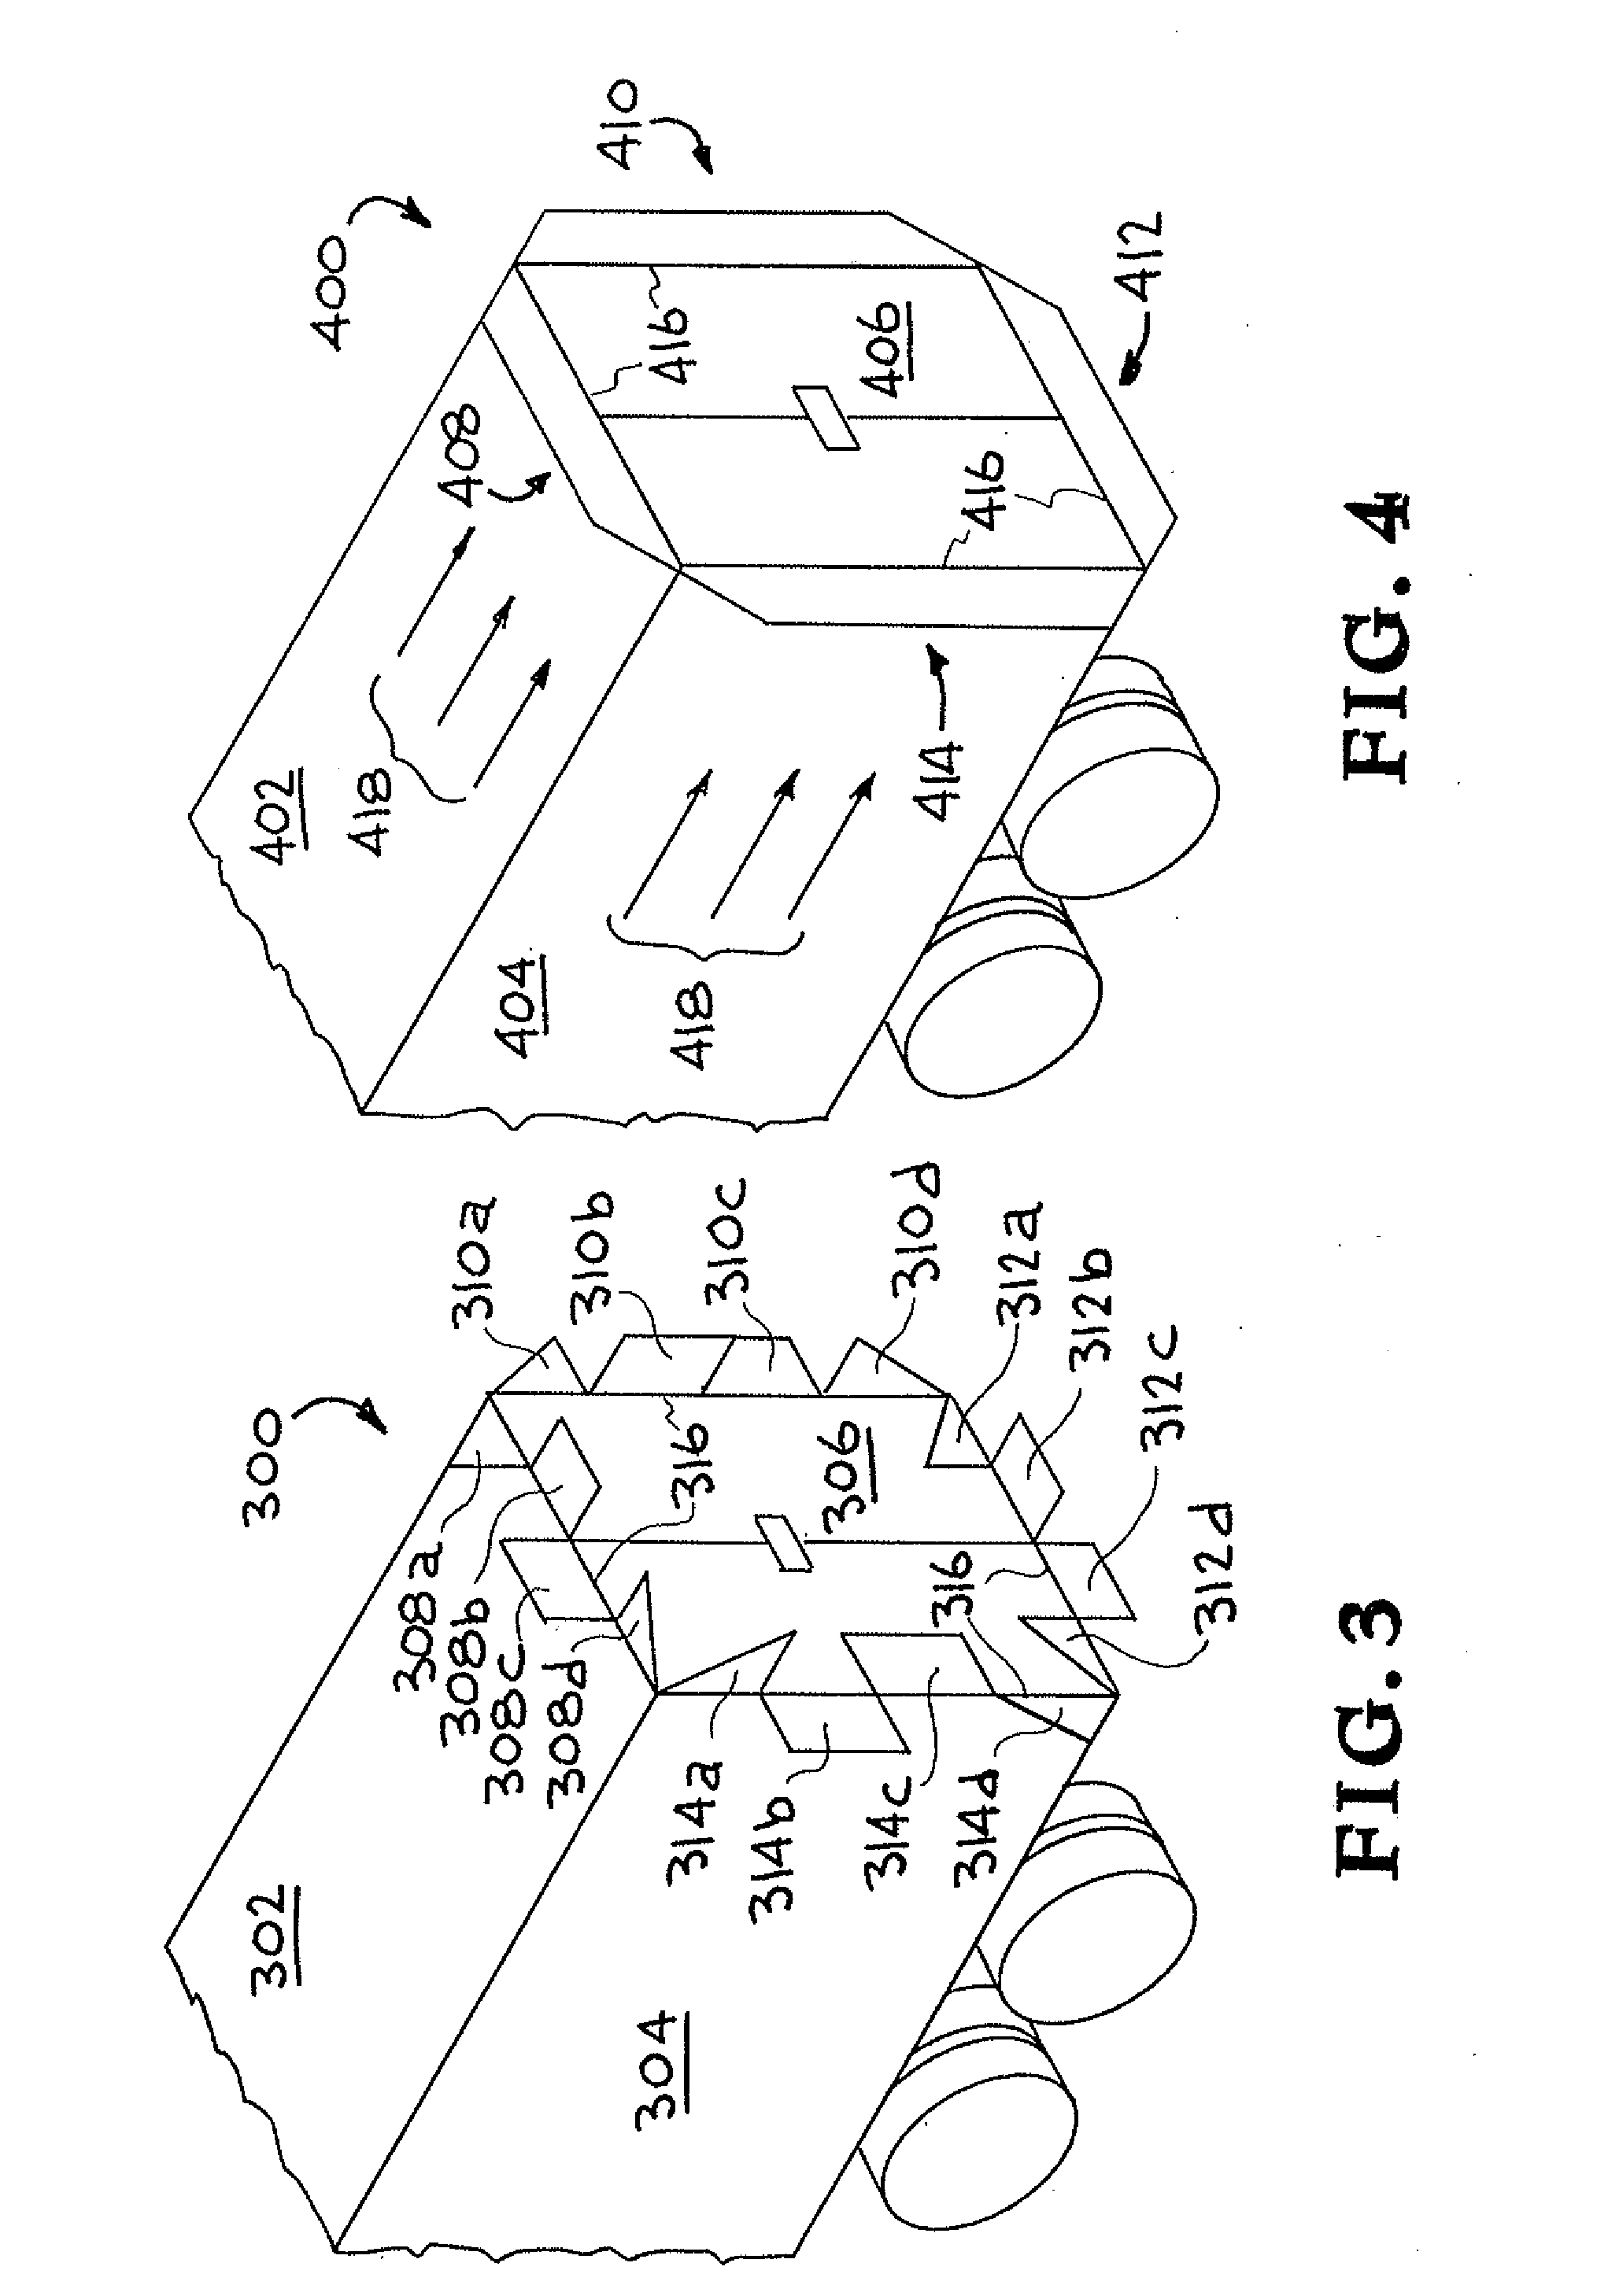 Articulating base flaps for aerodynamic base drag reduction and stability of a bluff body vehicle